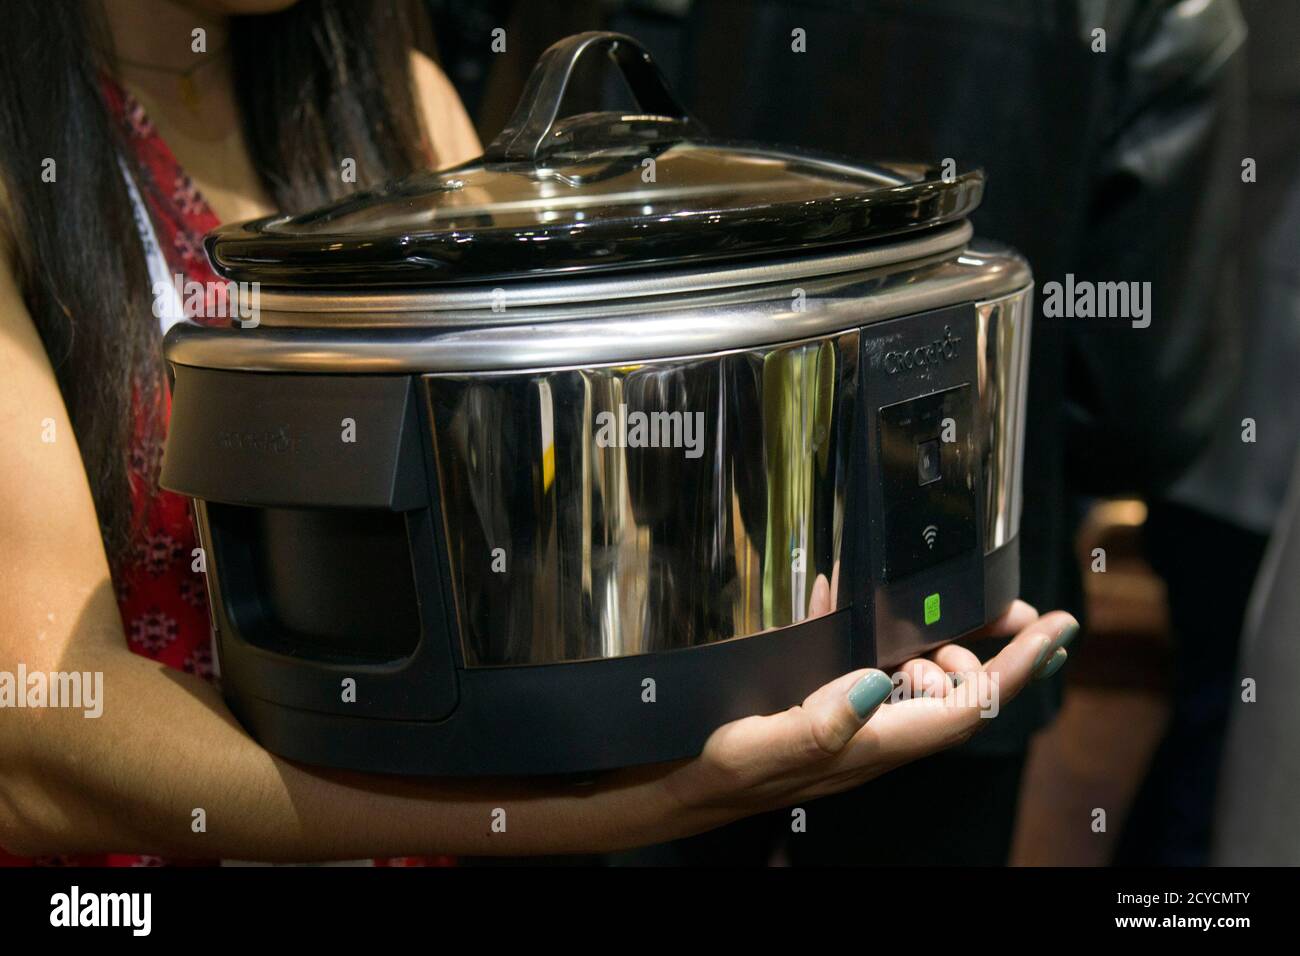 A Belkin Crock-Pot WeMo Smart Slow Cooker ($99.99) is displayed during 'CES Unveiled,' a media preview event to the annual Consumer Electronics Show (CES), in Las Vegas, Nevada, January 5, 2014. The crock-pot can be controlled remotely via a smartphone. The appliance should be available in March, a representative said. REUTERS/Steve Marcus (UNITED STATES - Tags: BUSINESS SCIENCE TECHNOLOGY) Stock Photo